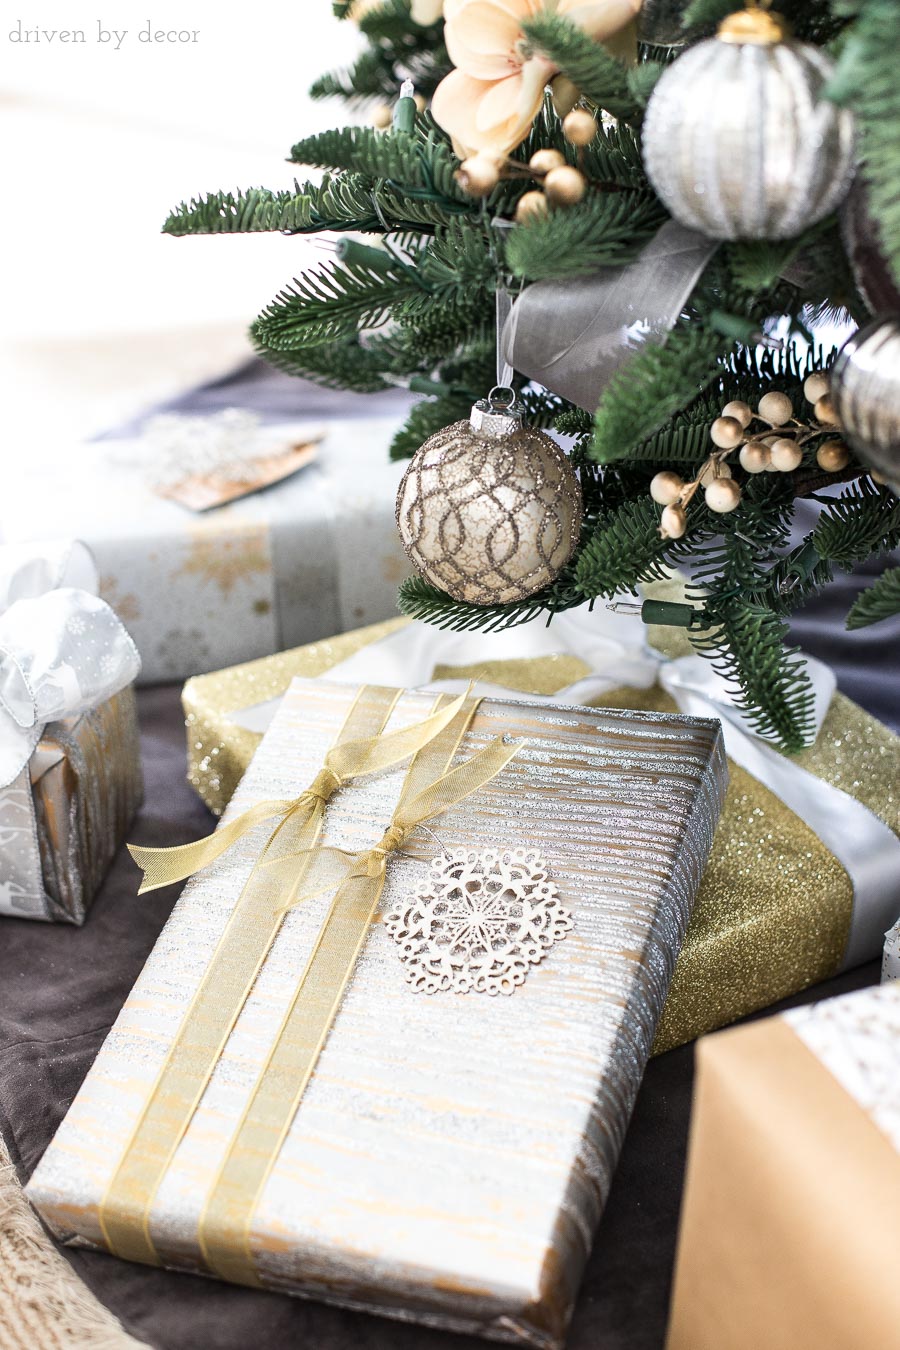 Wrapping Christmas Presents: 10 Ideas To Take Your Presents to the Next  Level! - Driven by Decor